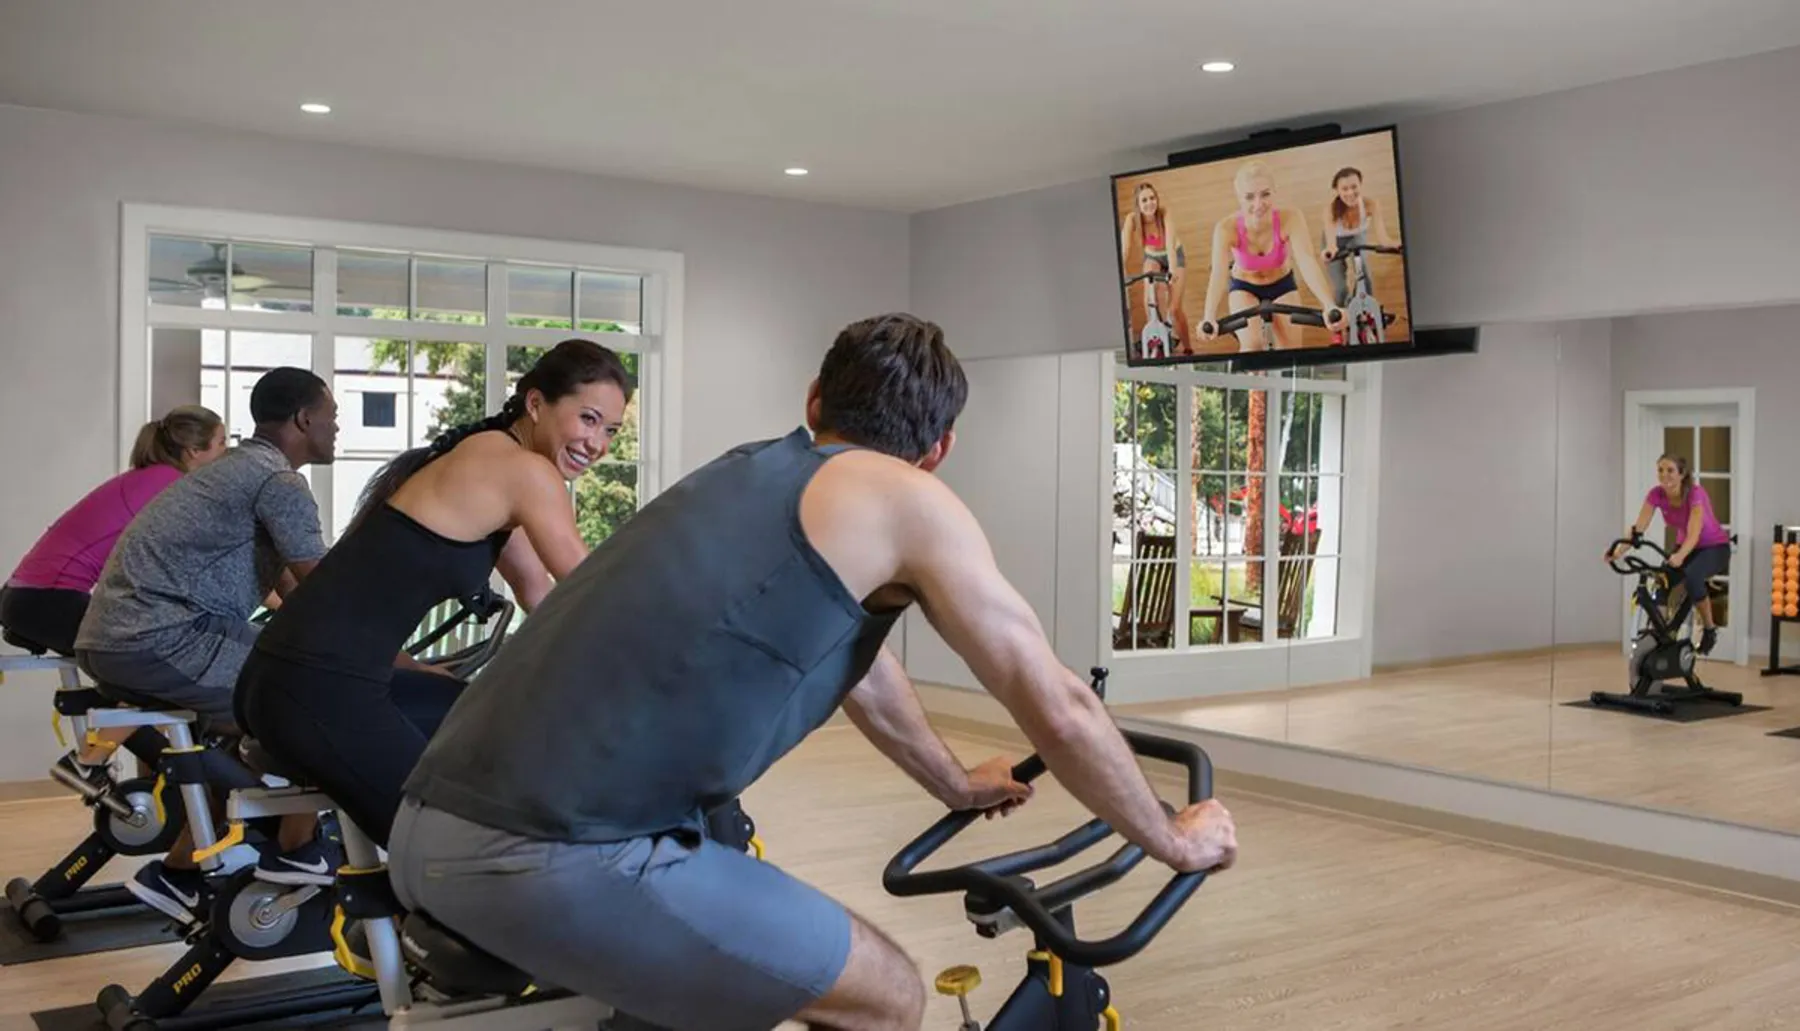 A group of people are riding stationary bikes in a fitness class while watching an instructor on a large screen in a well-lit room.